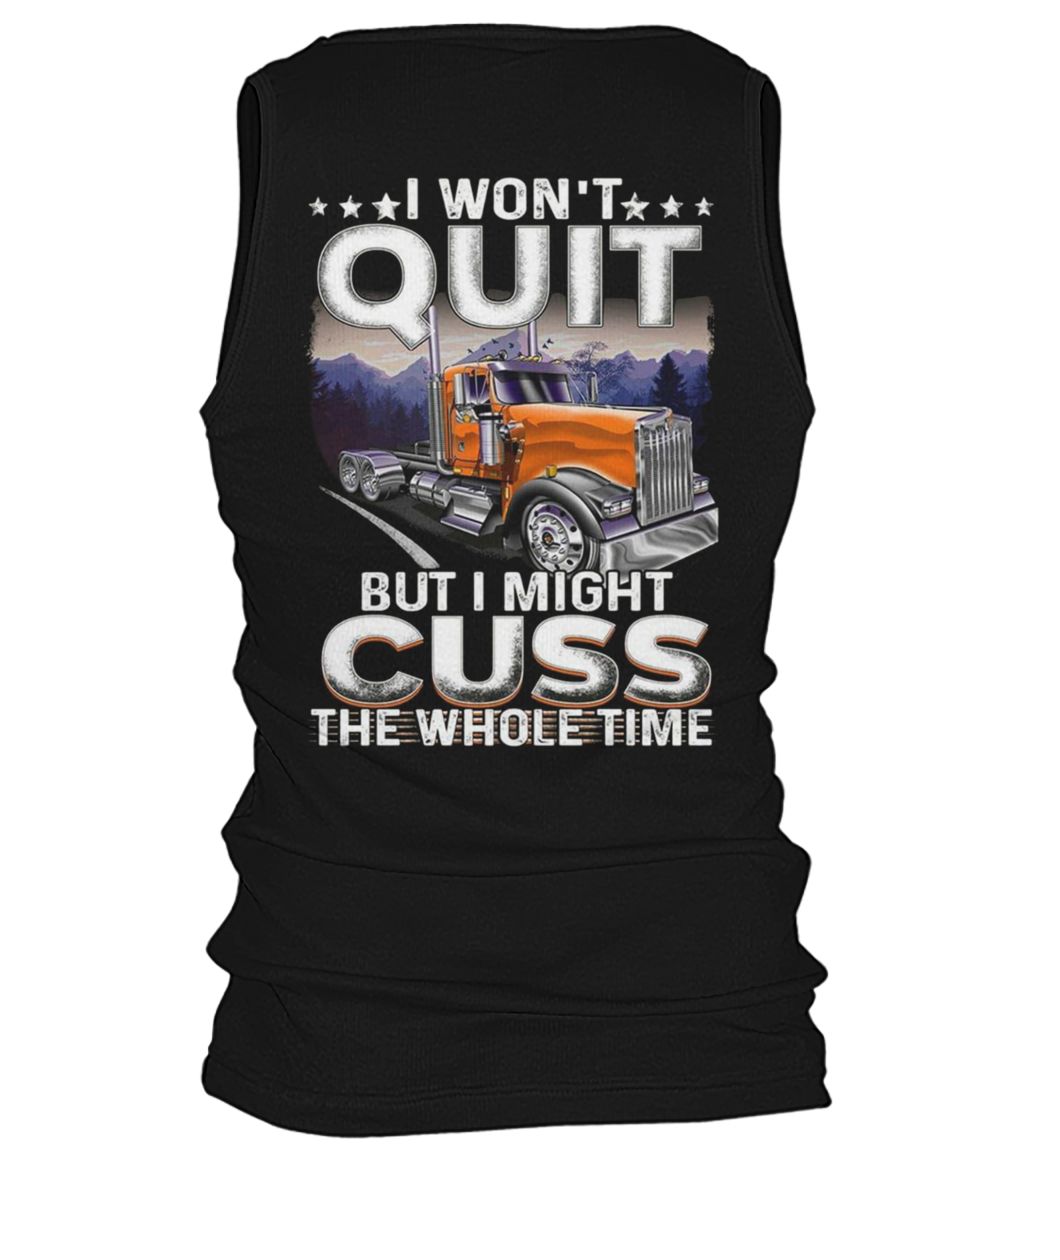 Trucker I won't quit but I might cuss the whole time men's tank top